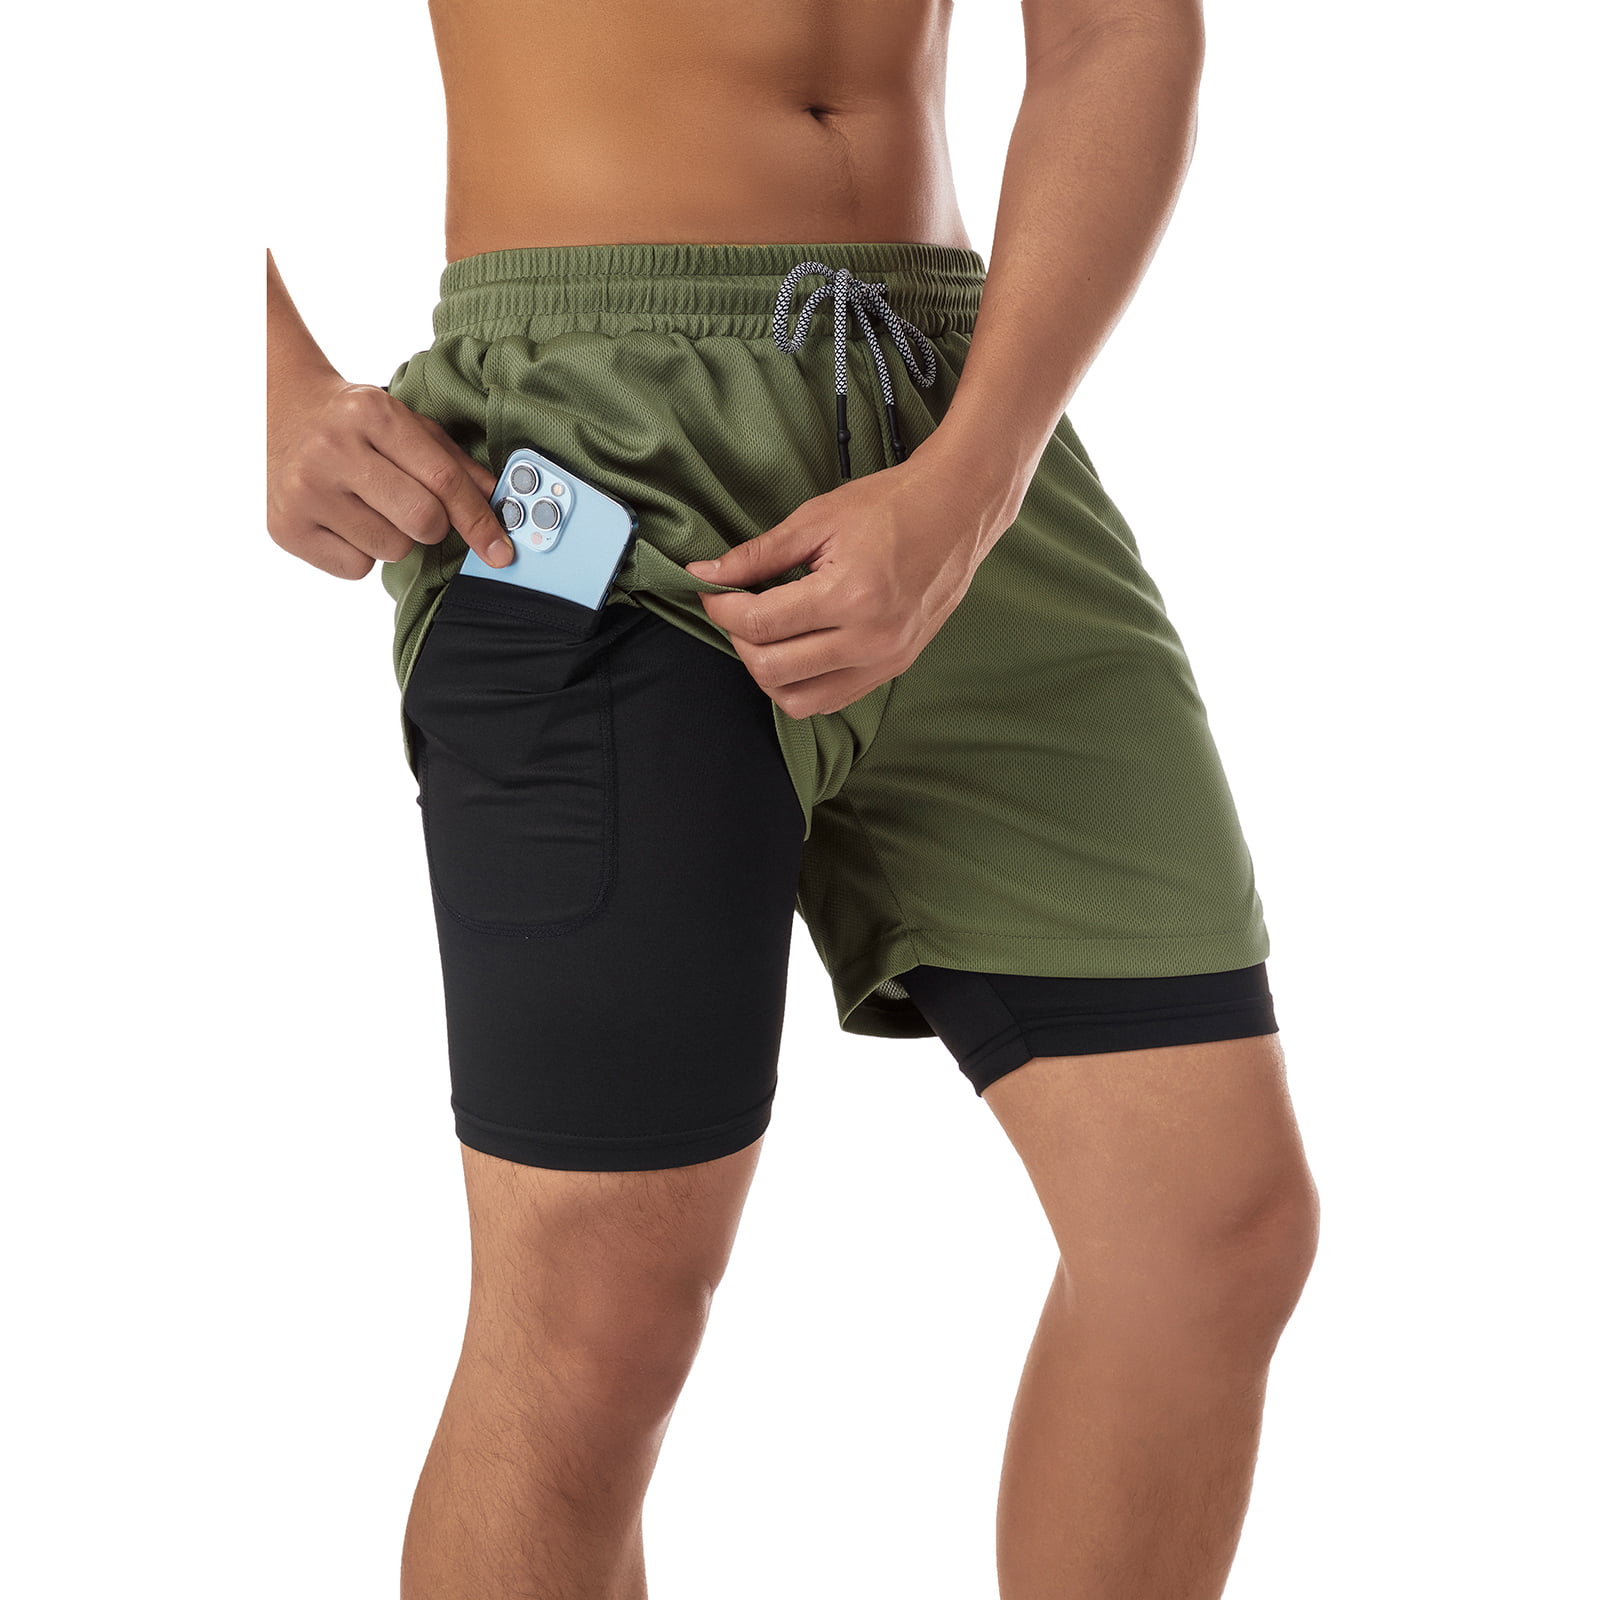 Men Workout Sport Shorts Athletic Quick Dry Elastic Waist Bottom with Towel Loop 